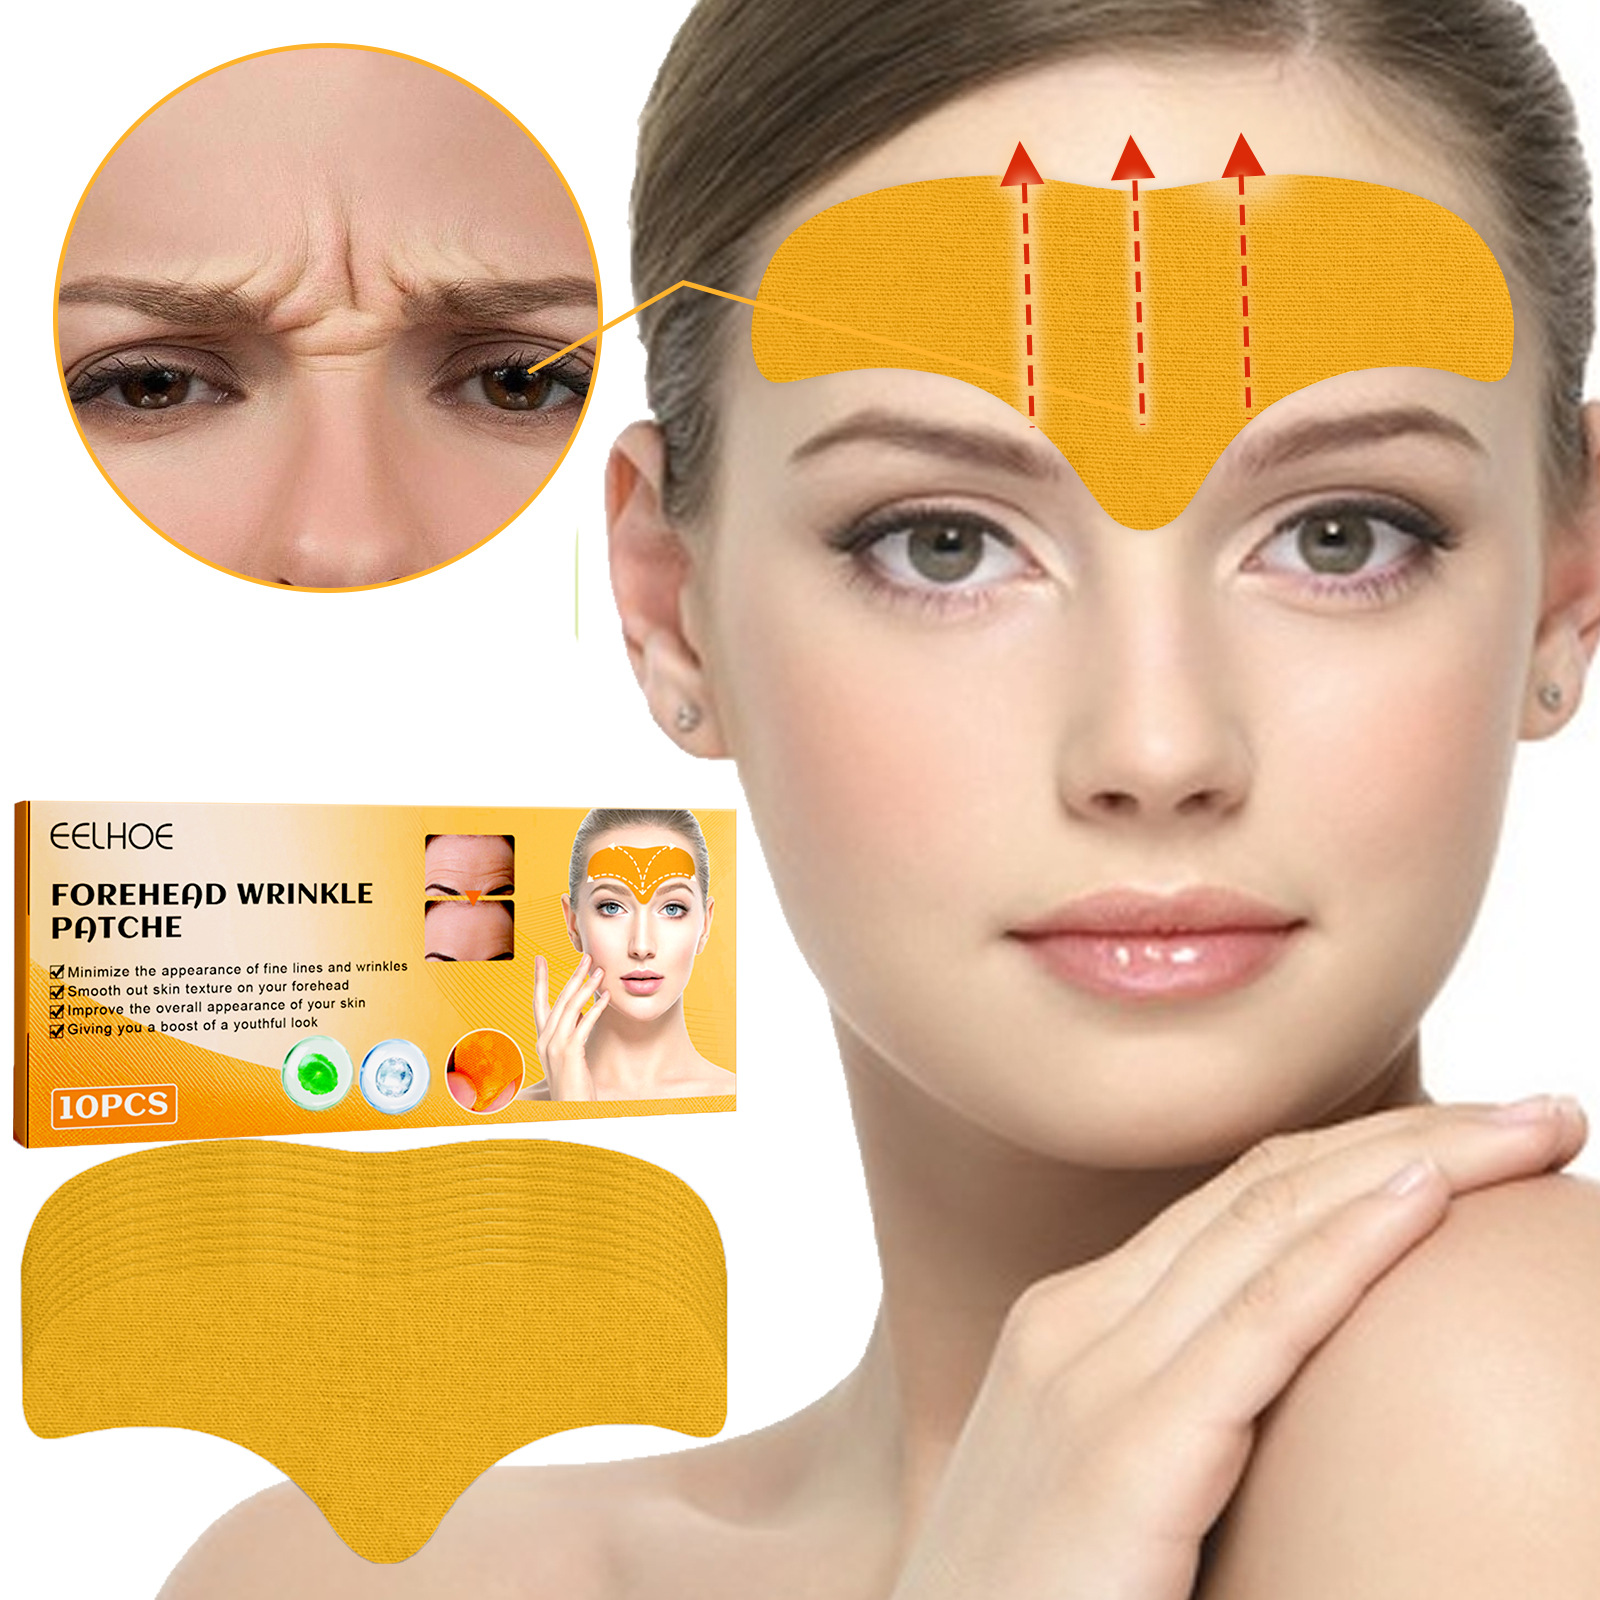 10pcs Frontal Wrinkle Patch - Smooth, Soften and Lift Face